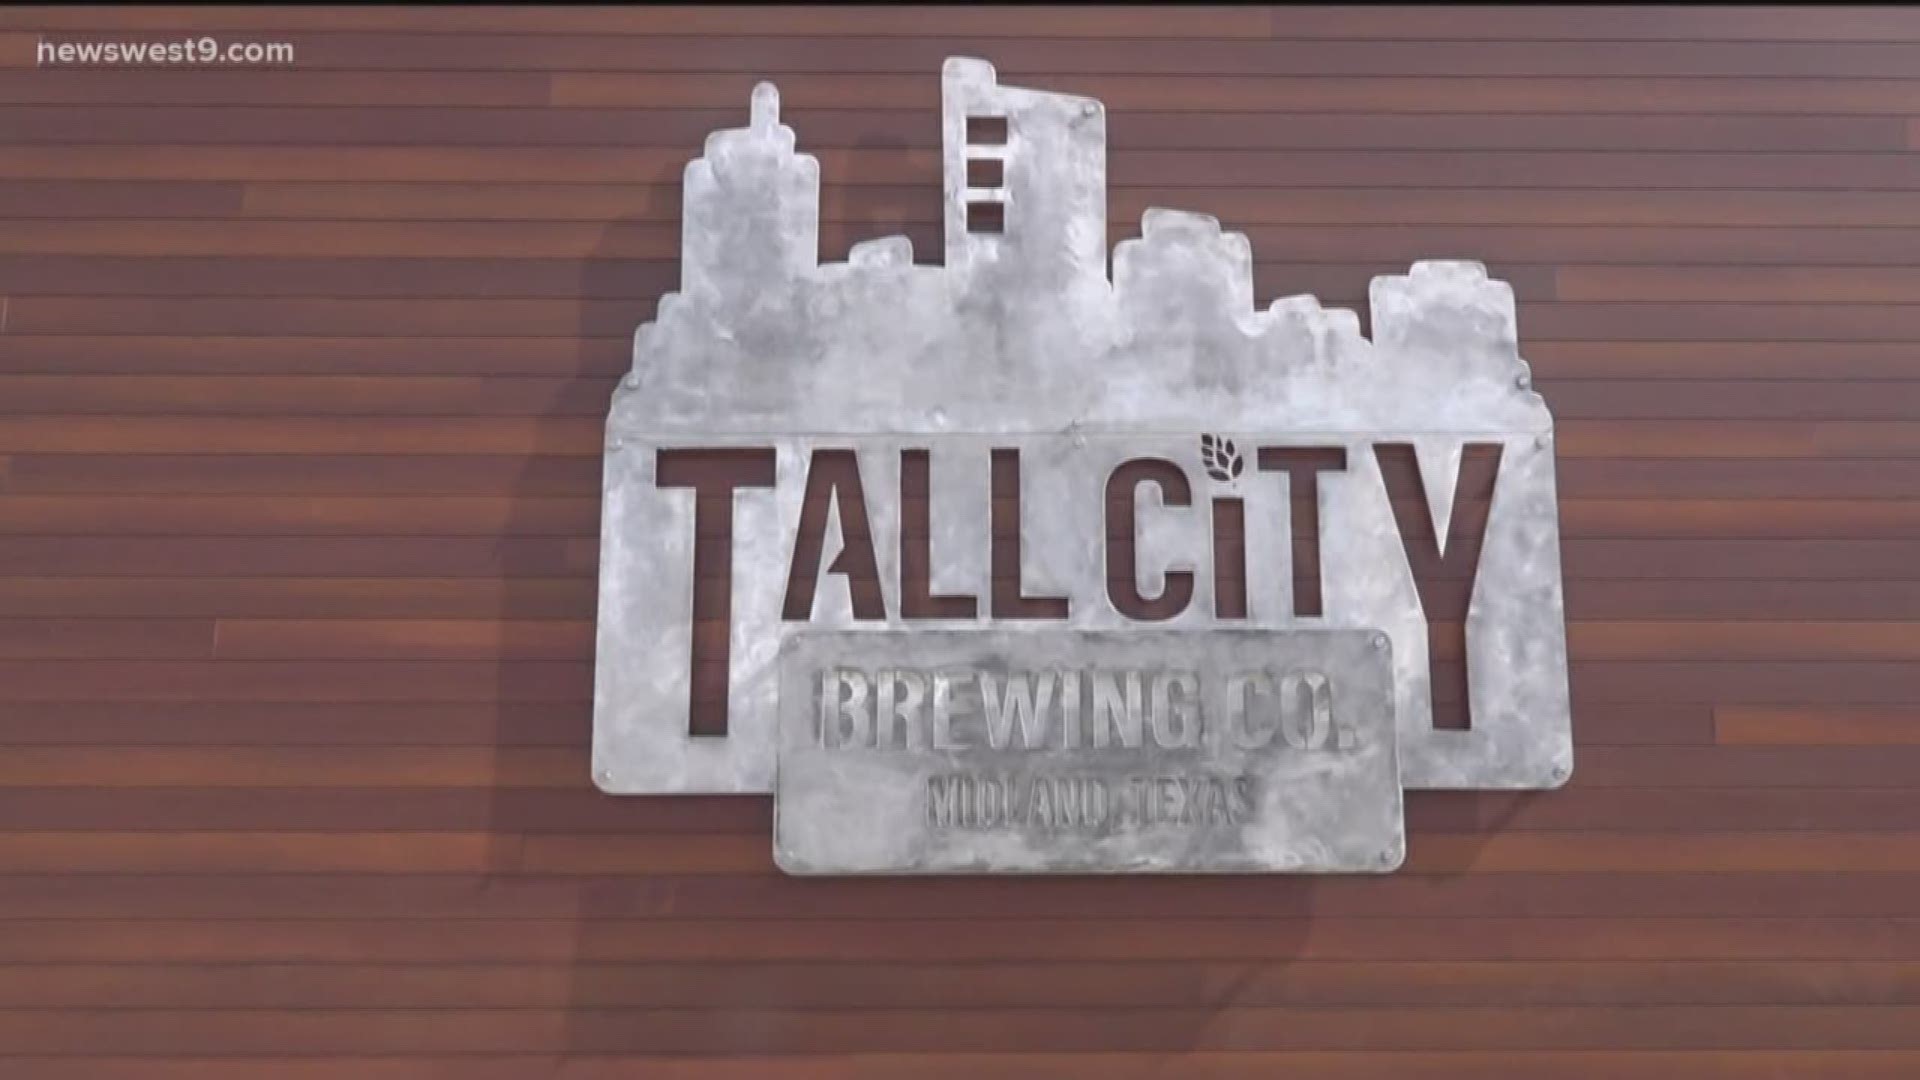 Despite being limited to curbside only, Tall City Brewing Co. hasn't struggled as hard as many other businesses over the last two months.